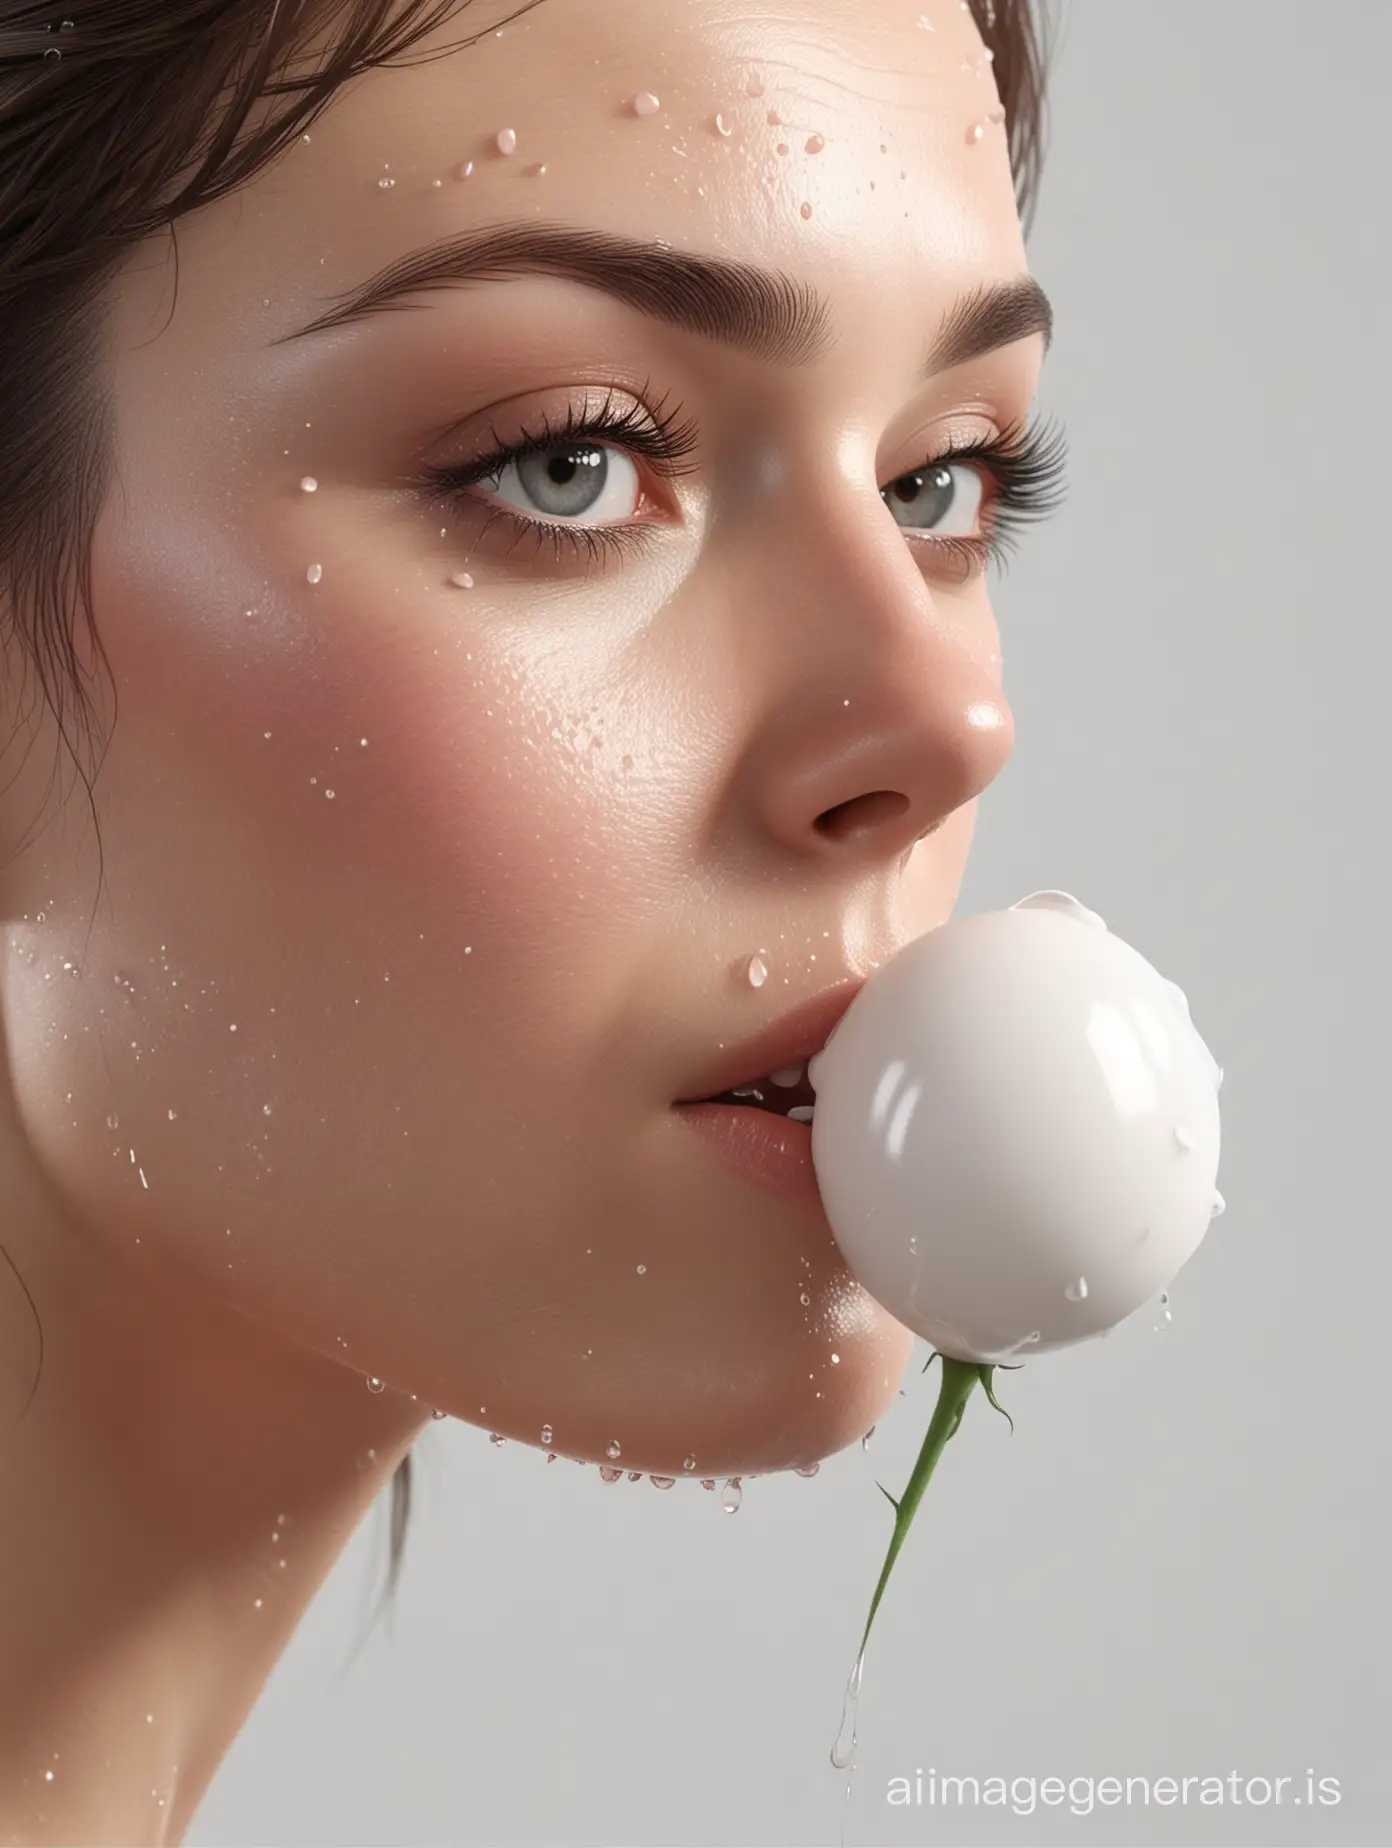  [(Balloon filled with milk burst:1.10), (Droplets forming a minimal European lady:1.20), (Sniffing a minimal rose:1.15), (White background:1.10), (Hyperrealistic HD:1.[(High-definition:1.15), (Professional:1.15), (Masterpiece:1.20), (Ambient occlusion:1.10), (Global illumination:1.10), (Atmospheric effects:1.10), (Reflections:1.10), (